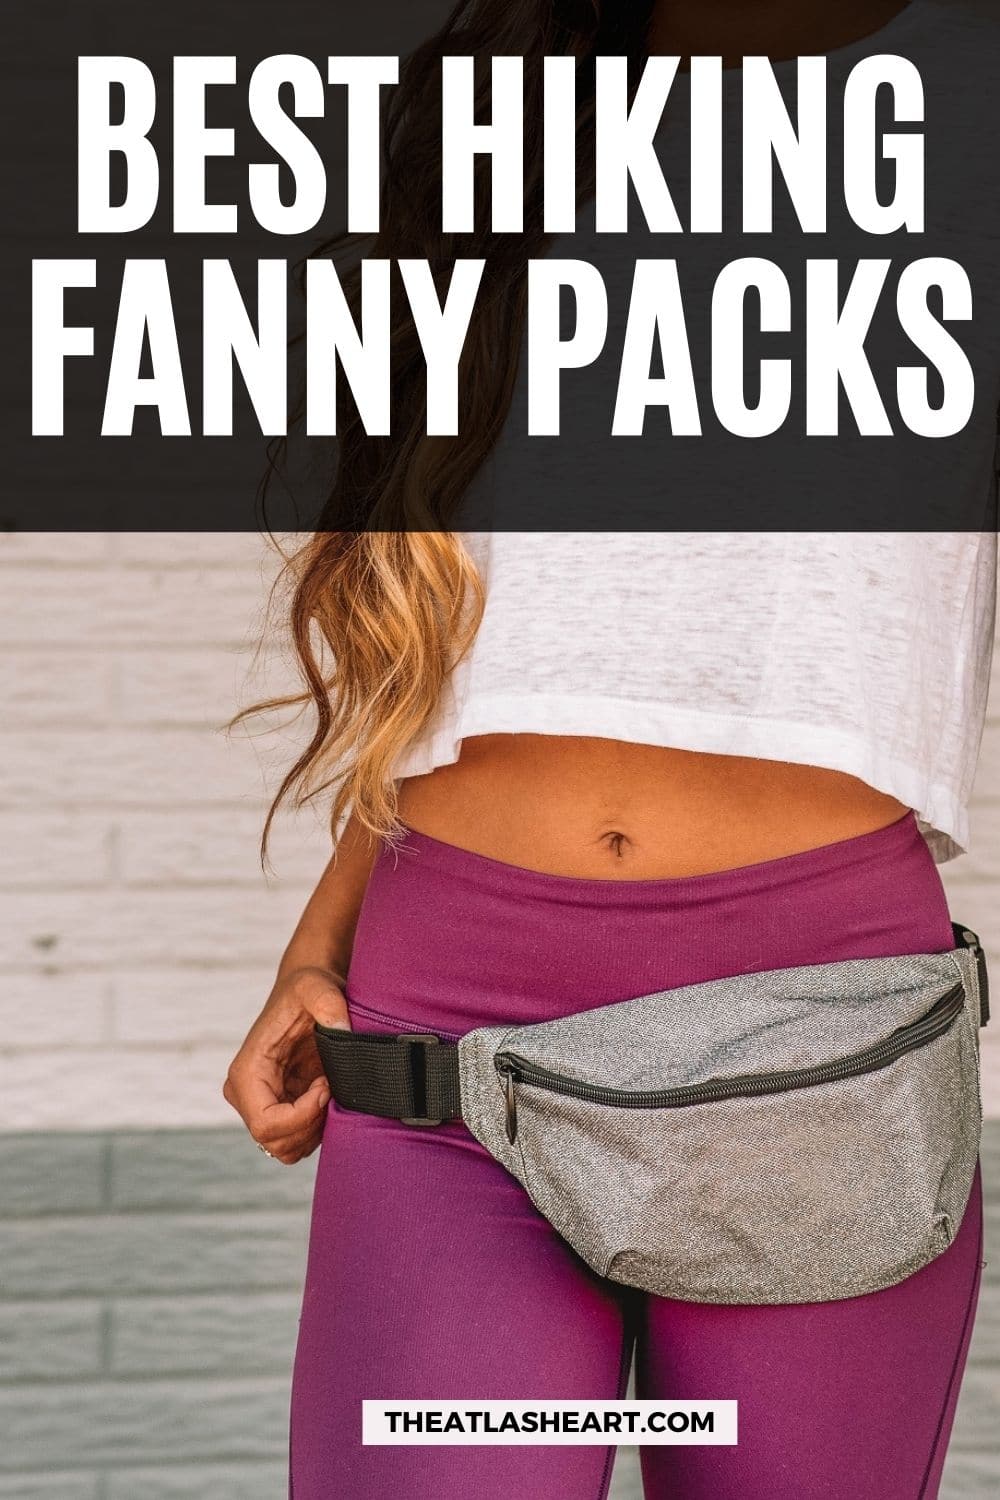 15 Best Hiking Fanny Packs to Stay Hands-Free on the Trail